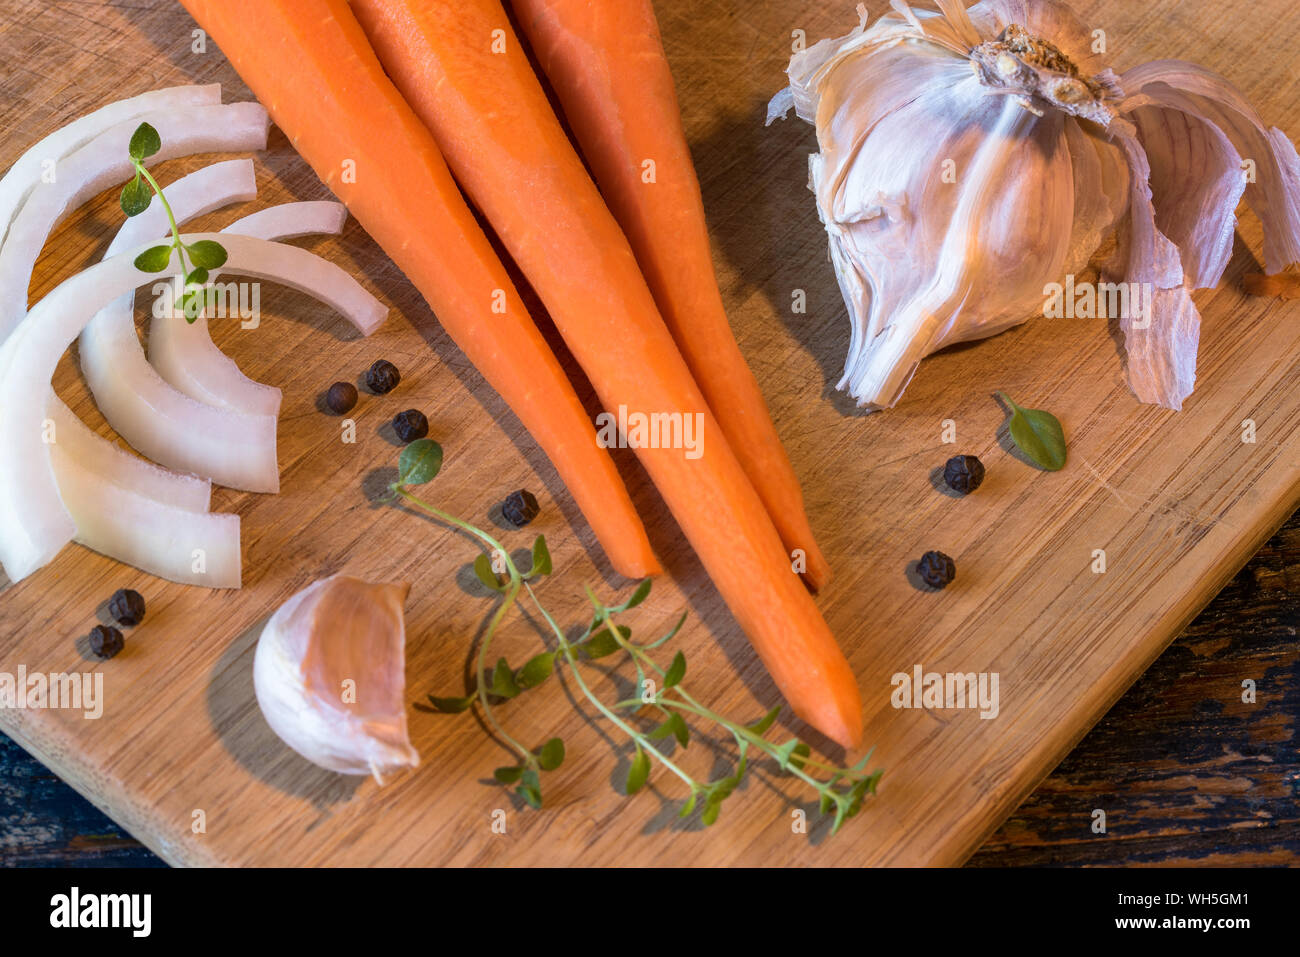 High Angle View Of Fresh Food On Cutting Board Stock Photo